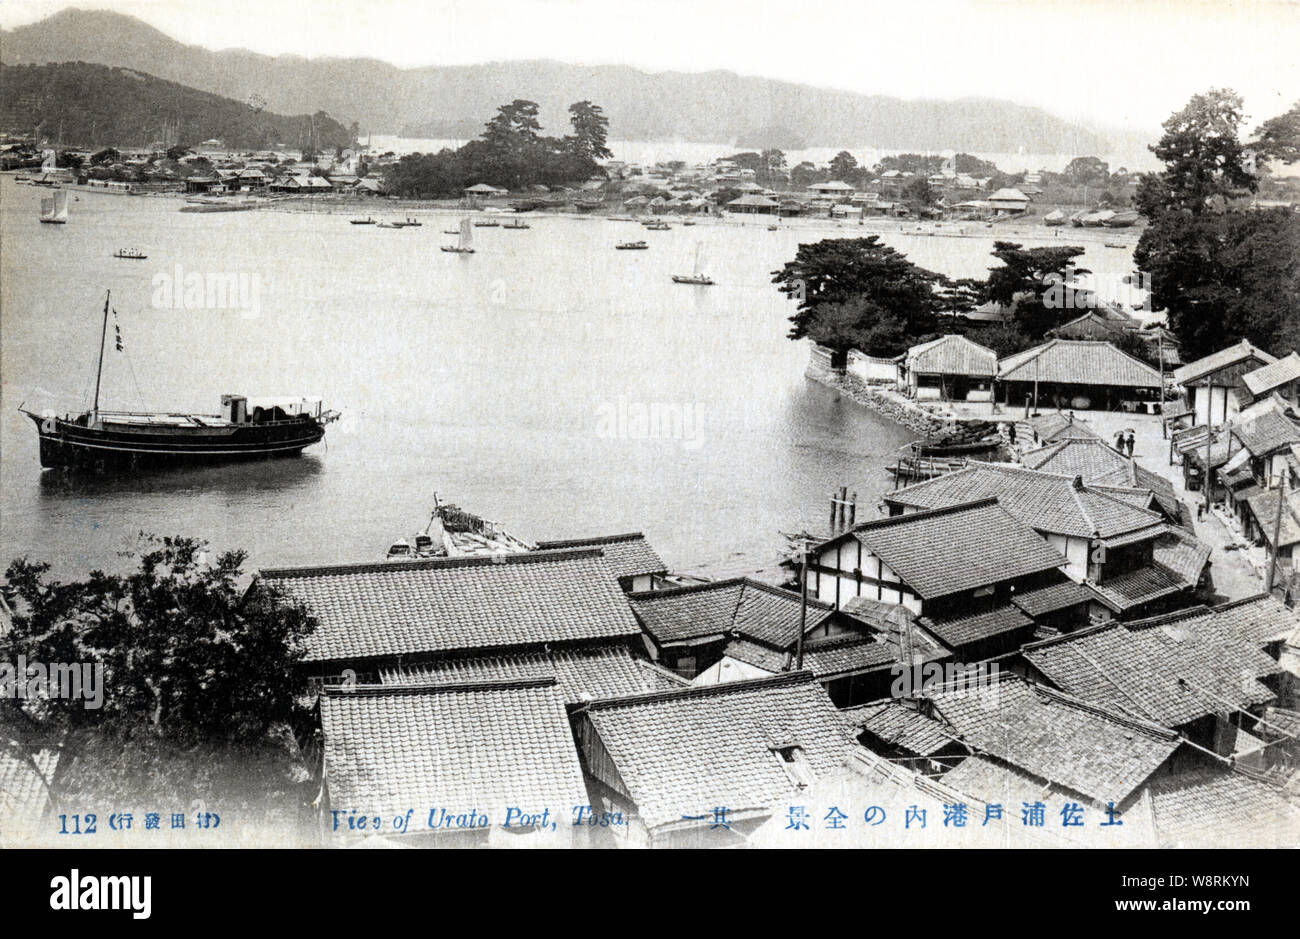 [ 1930s Japan - Japanese Fishing Port ] —   Panoramic view of Urado Port (浦戸港) in Kochi Prefecture, Shikoku. Kochi Prefecture was previously known as Tosa. During WWII, the Urado Naval Air Corps (浦戸海軍航空隊), which trained Special Attack Corps members (Kamikaze pilots), was located here.  20th century vintage postcard. Stock Photo